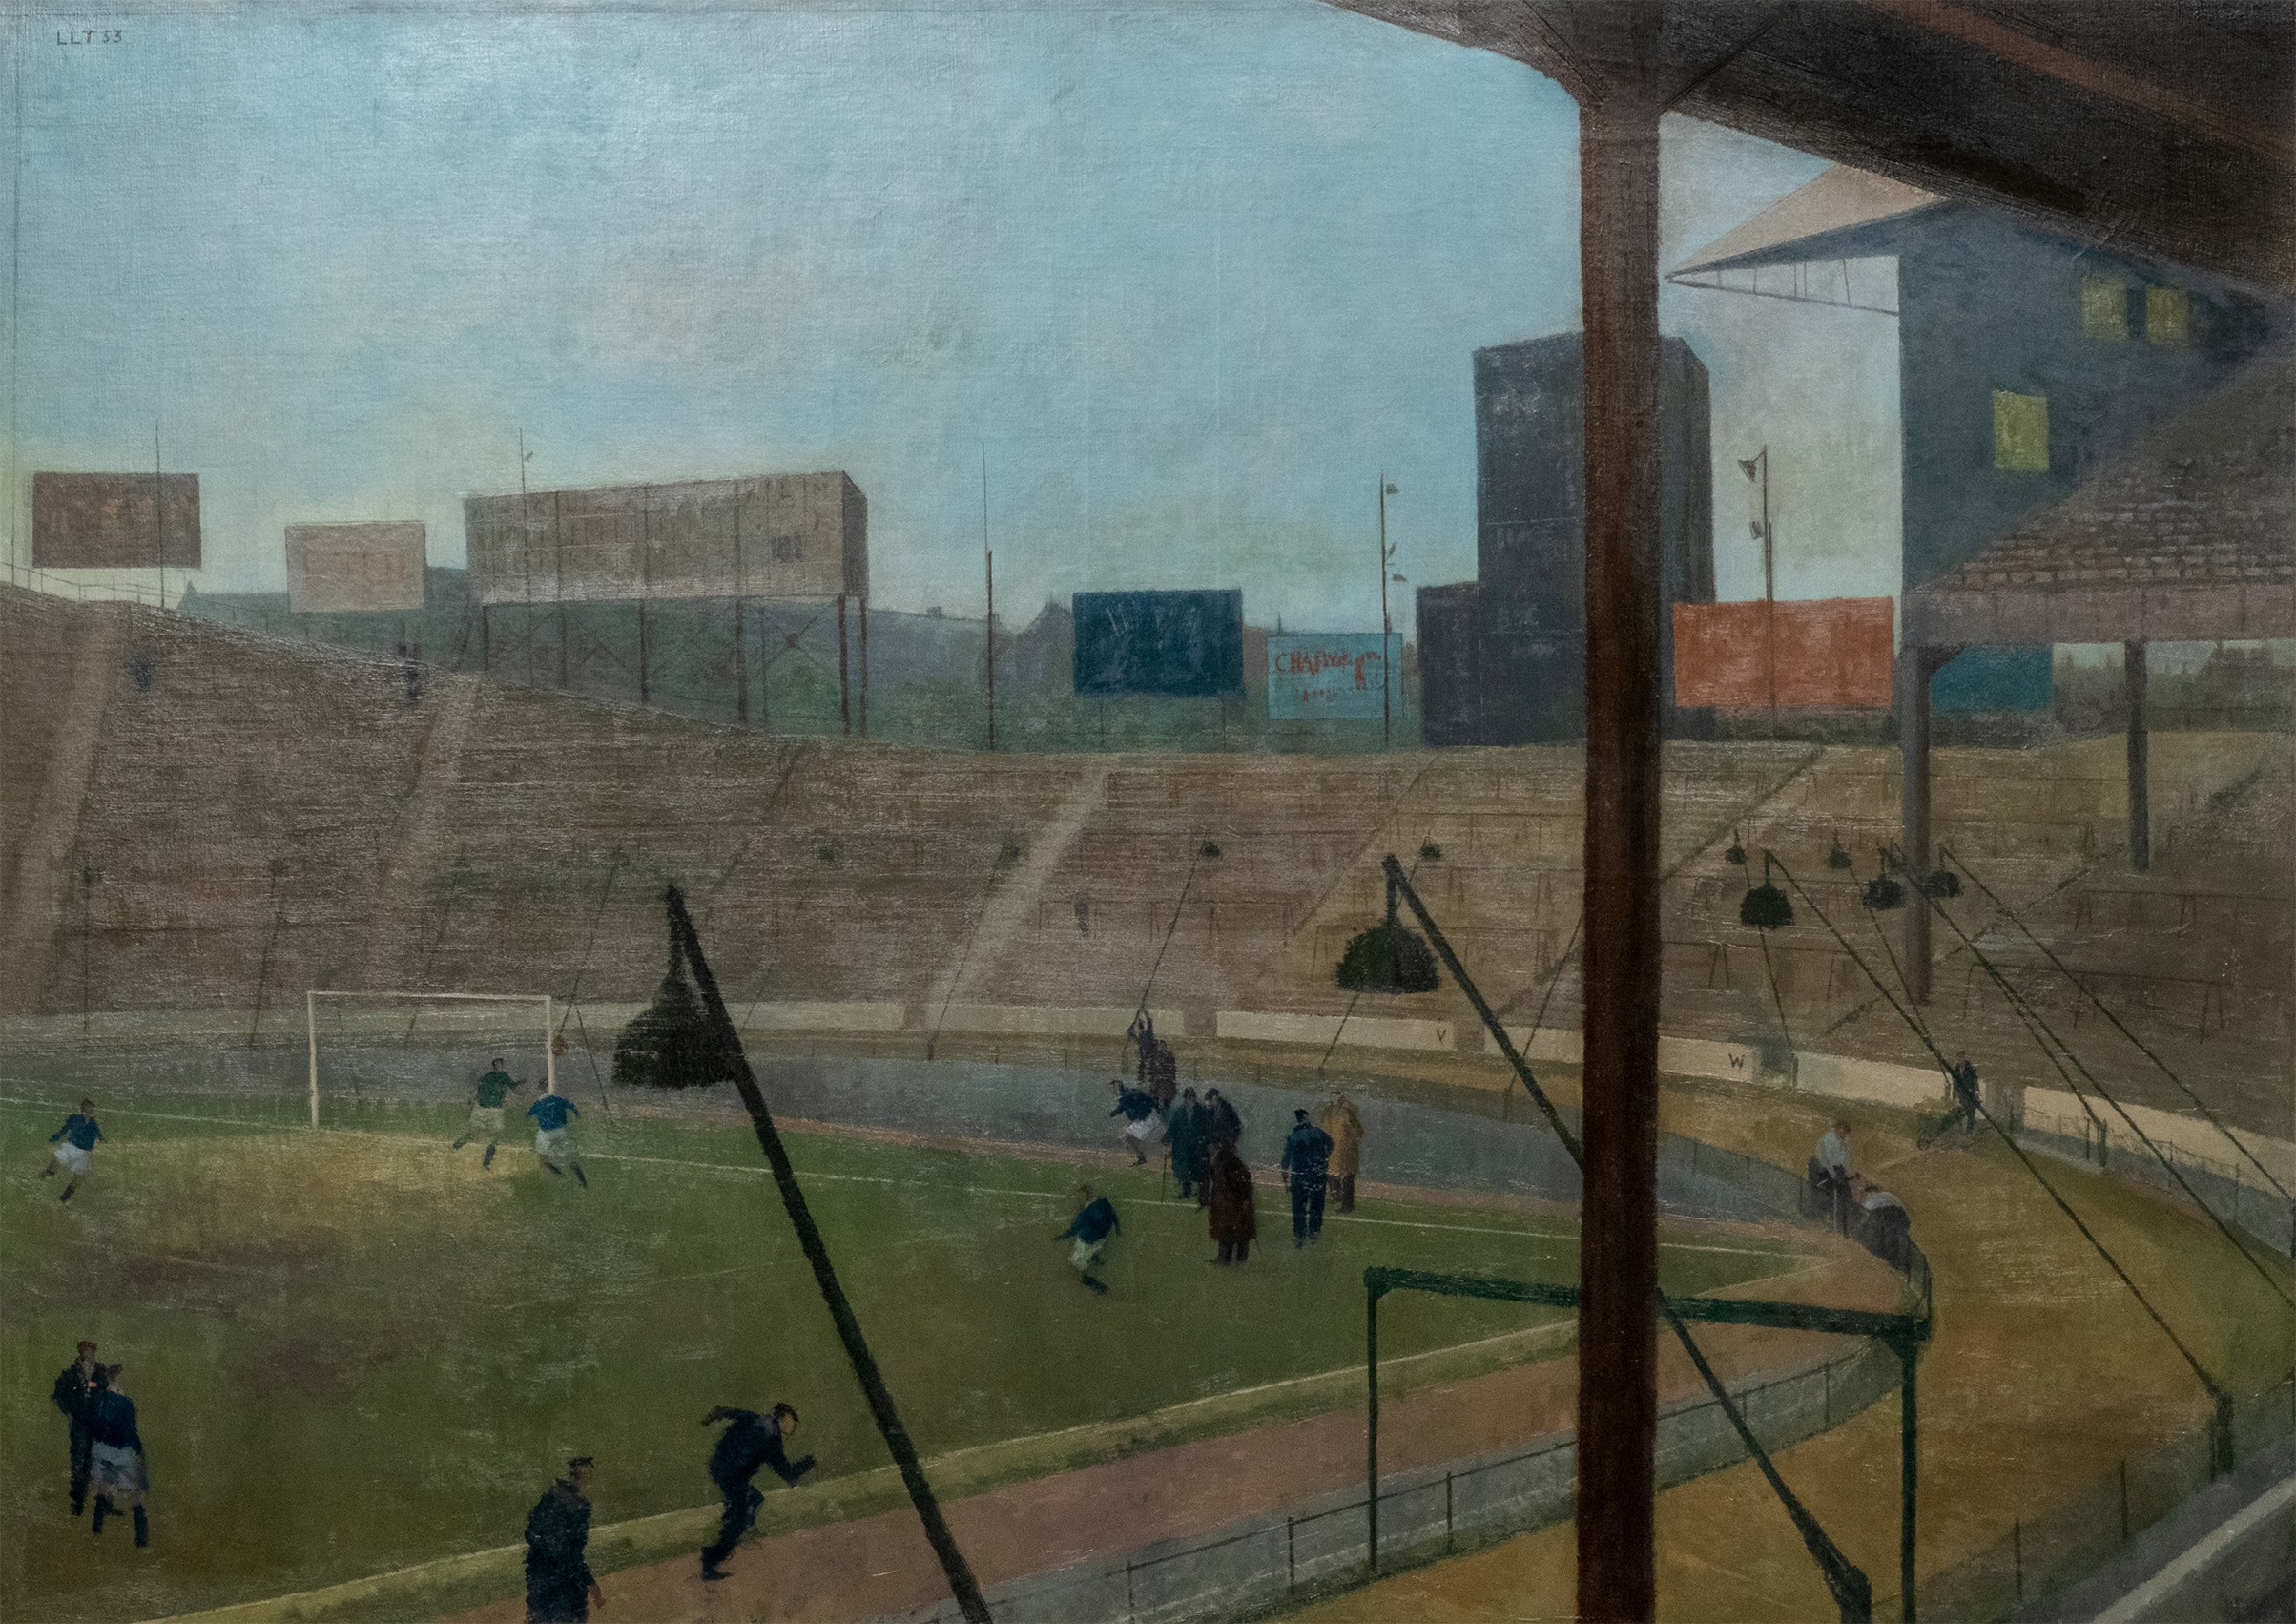 Lawrence Toynbee (1922-2002) Mid-week practice at Stamford Bridge 1953 Oil on canvas Image courtesy National Football Museum ©  The Estate of Lawrence Toynbee/Bridgeman Images